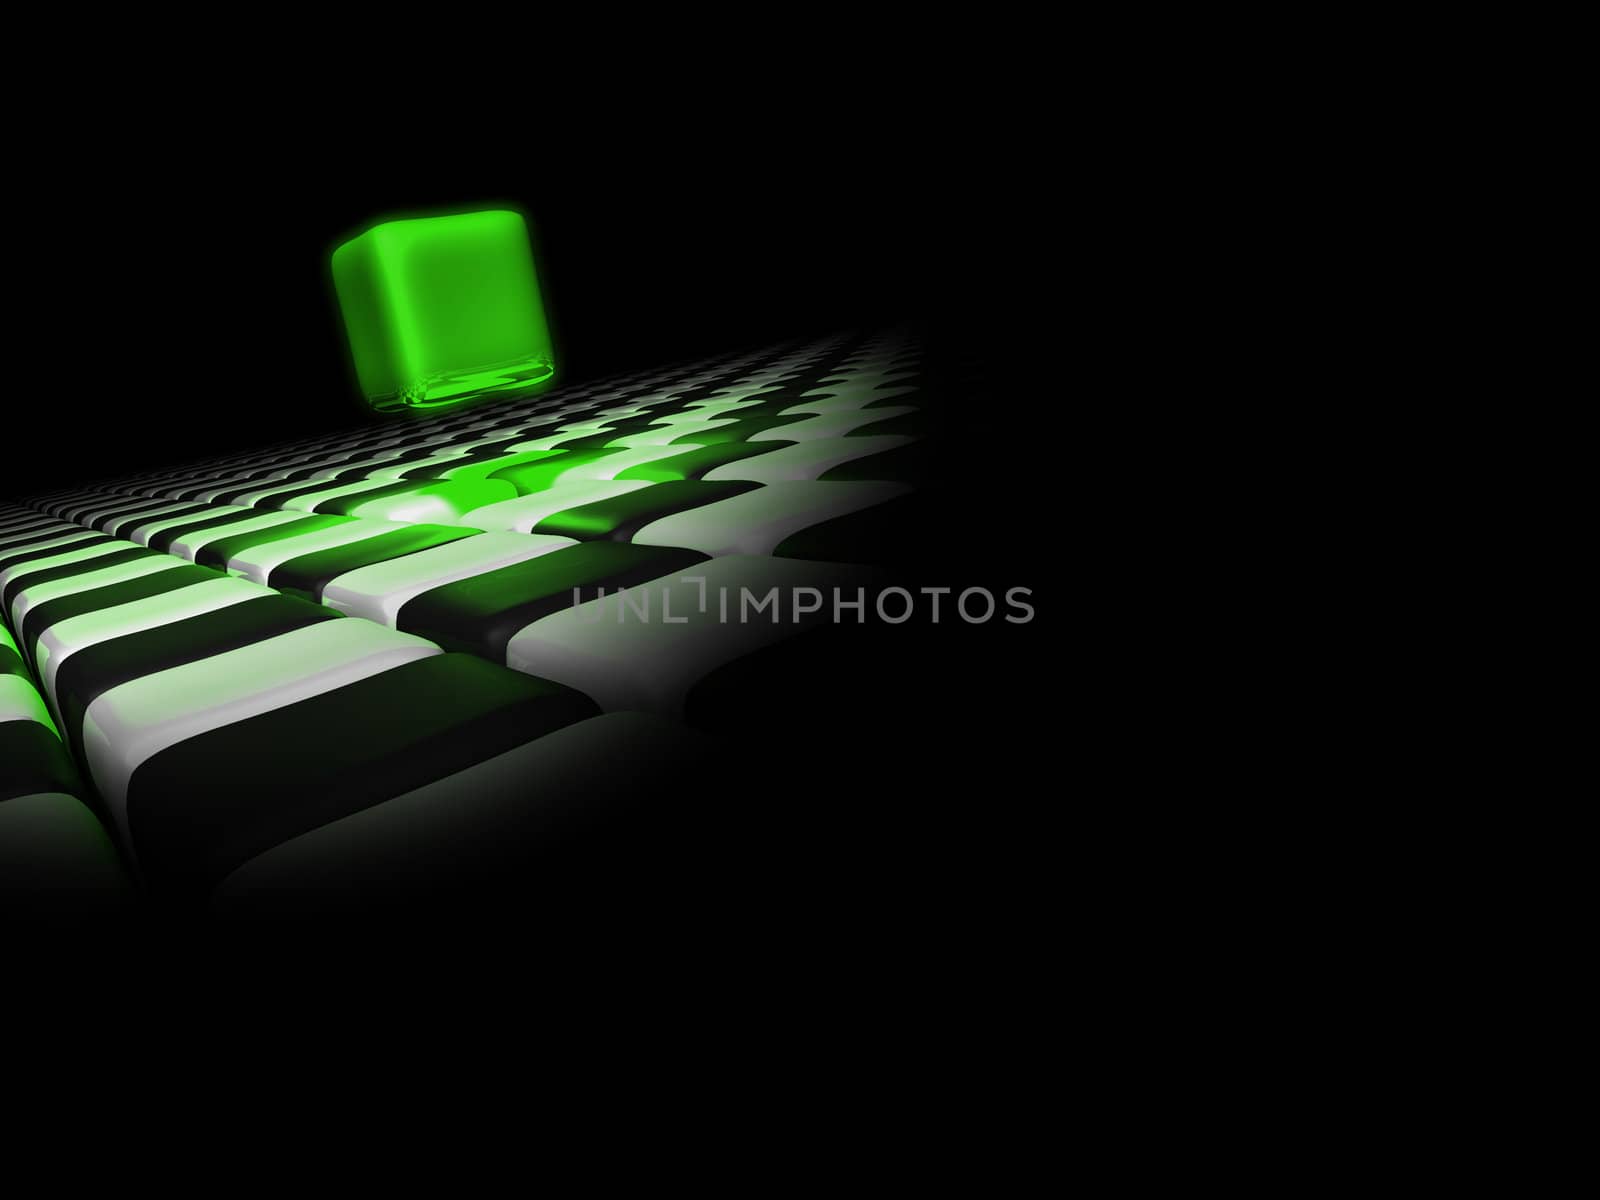 Green box above other boxes with a black background by shkyo30